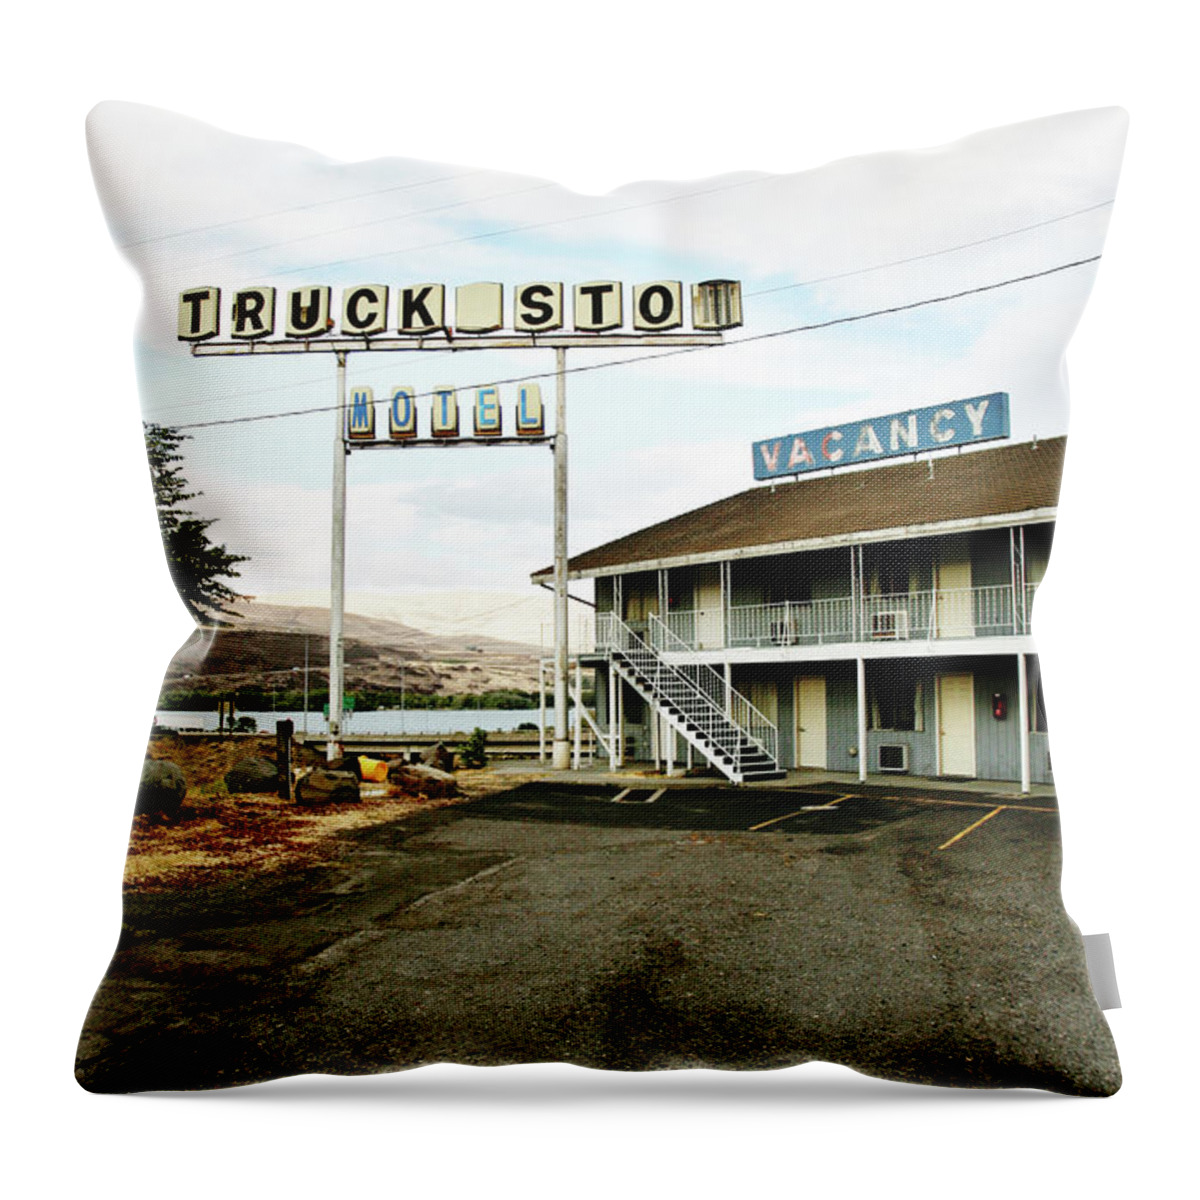 Steps Throw Pillow featuring the photograph Old Truck Stop And Motel Sign by Kevinruss